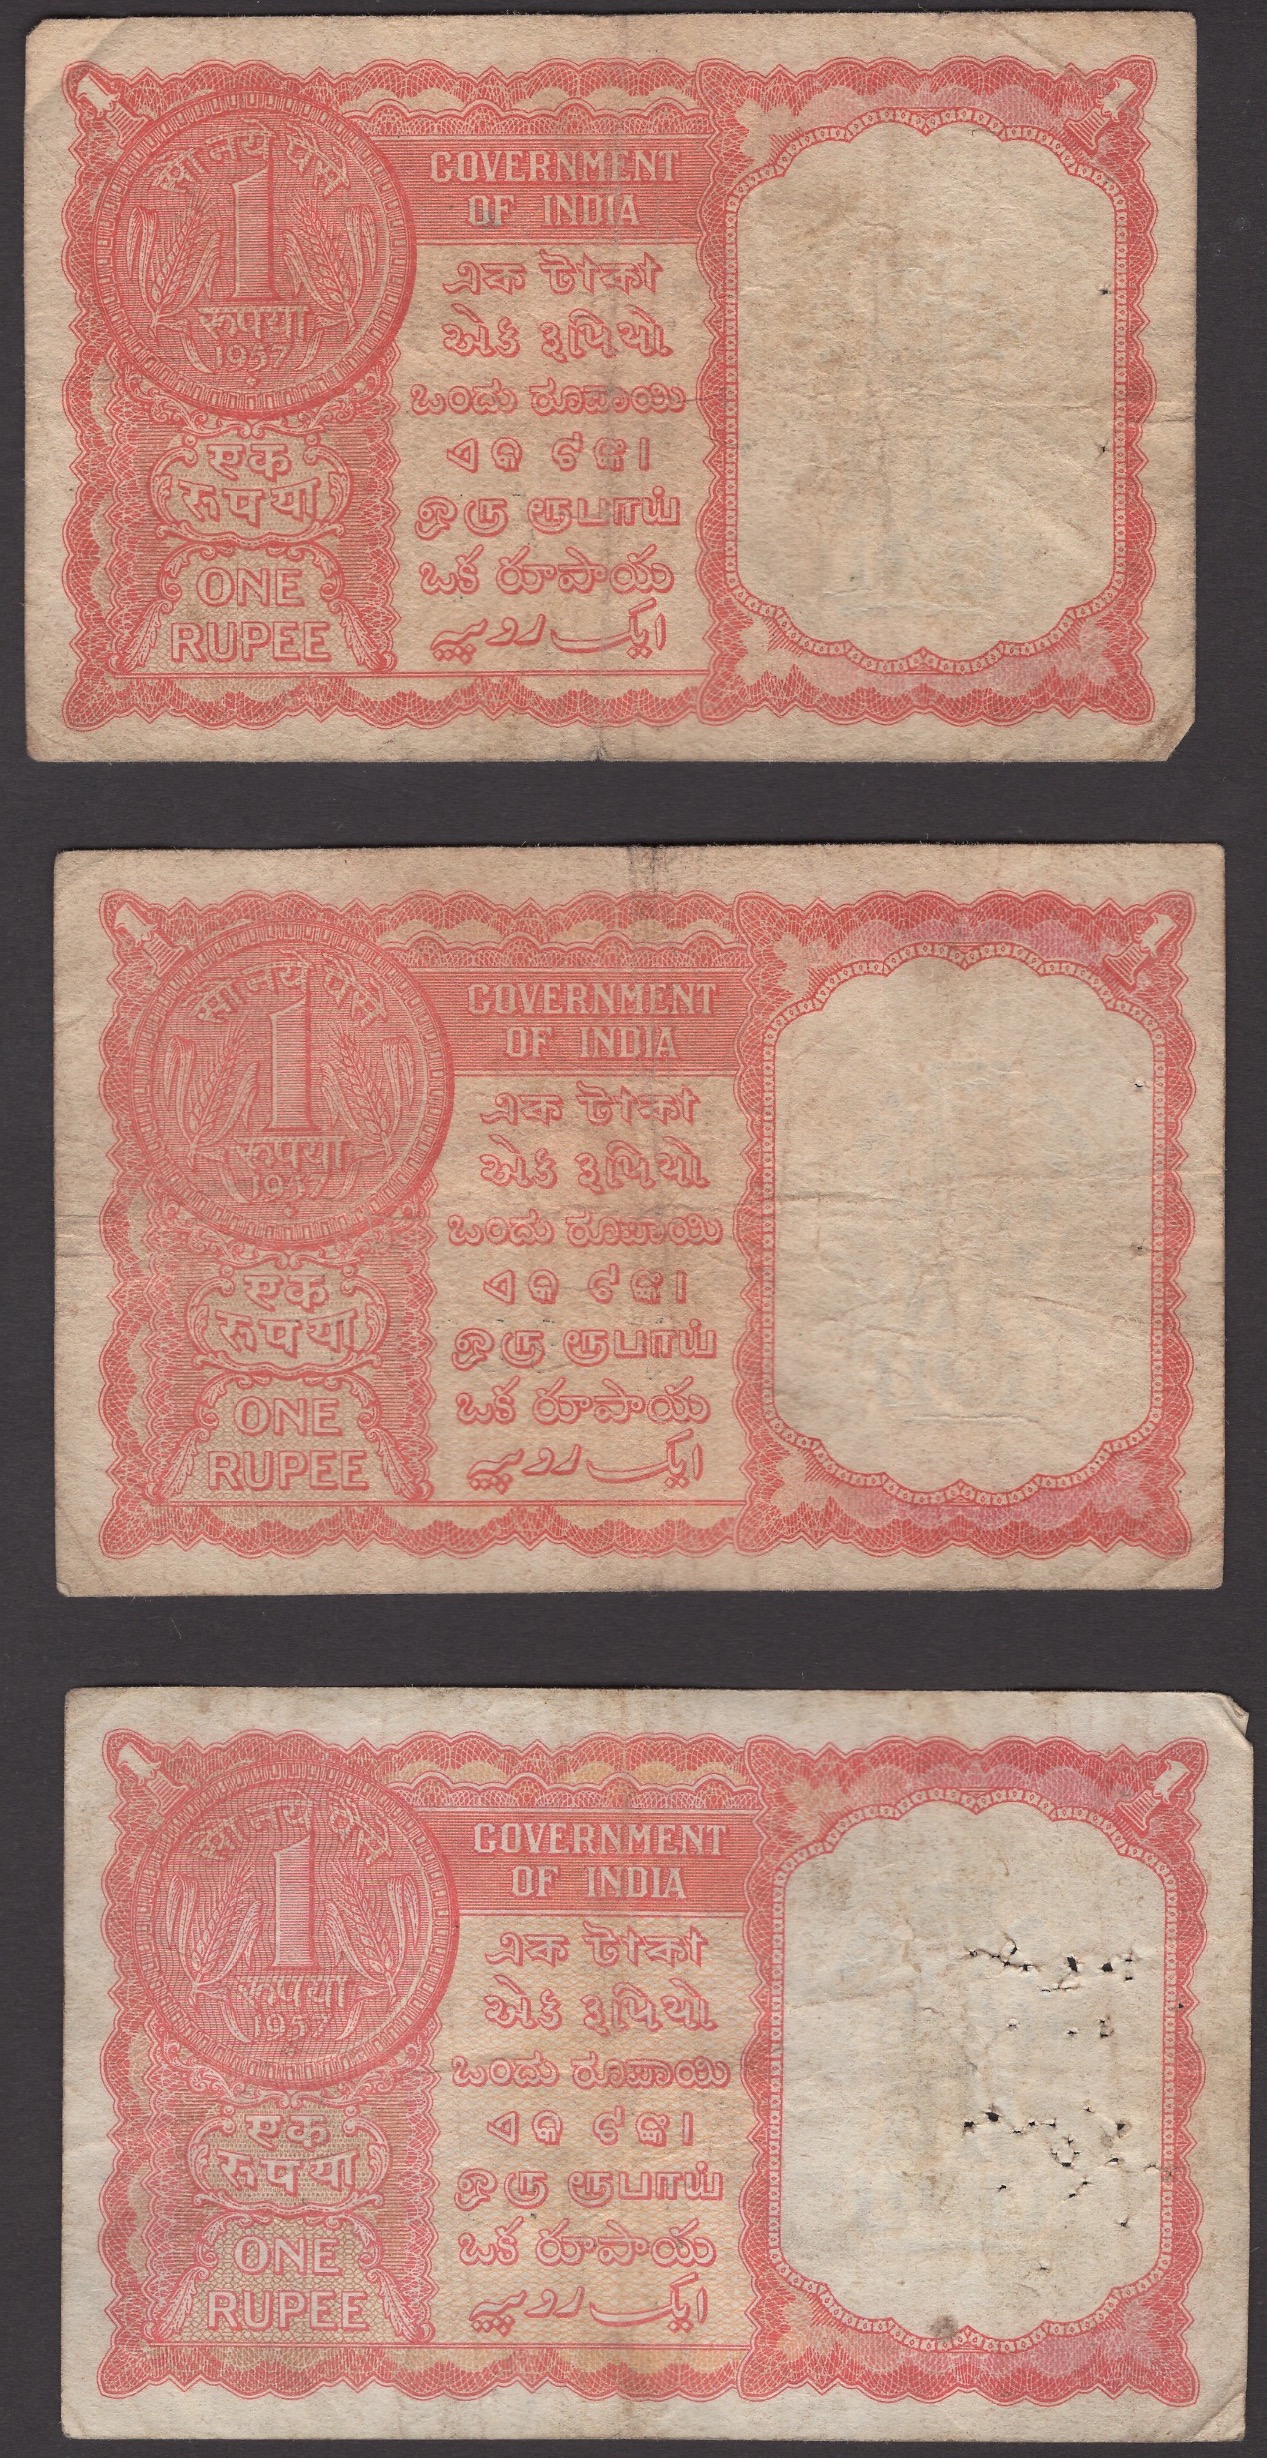 Government of India, Persian Gulf Issue, 1 Rupee (5), ND (1957-62), prefixes Z/0, Z/1, Z/3,... - Image 2 of 4